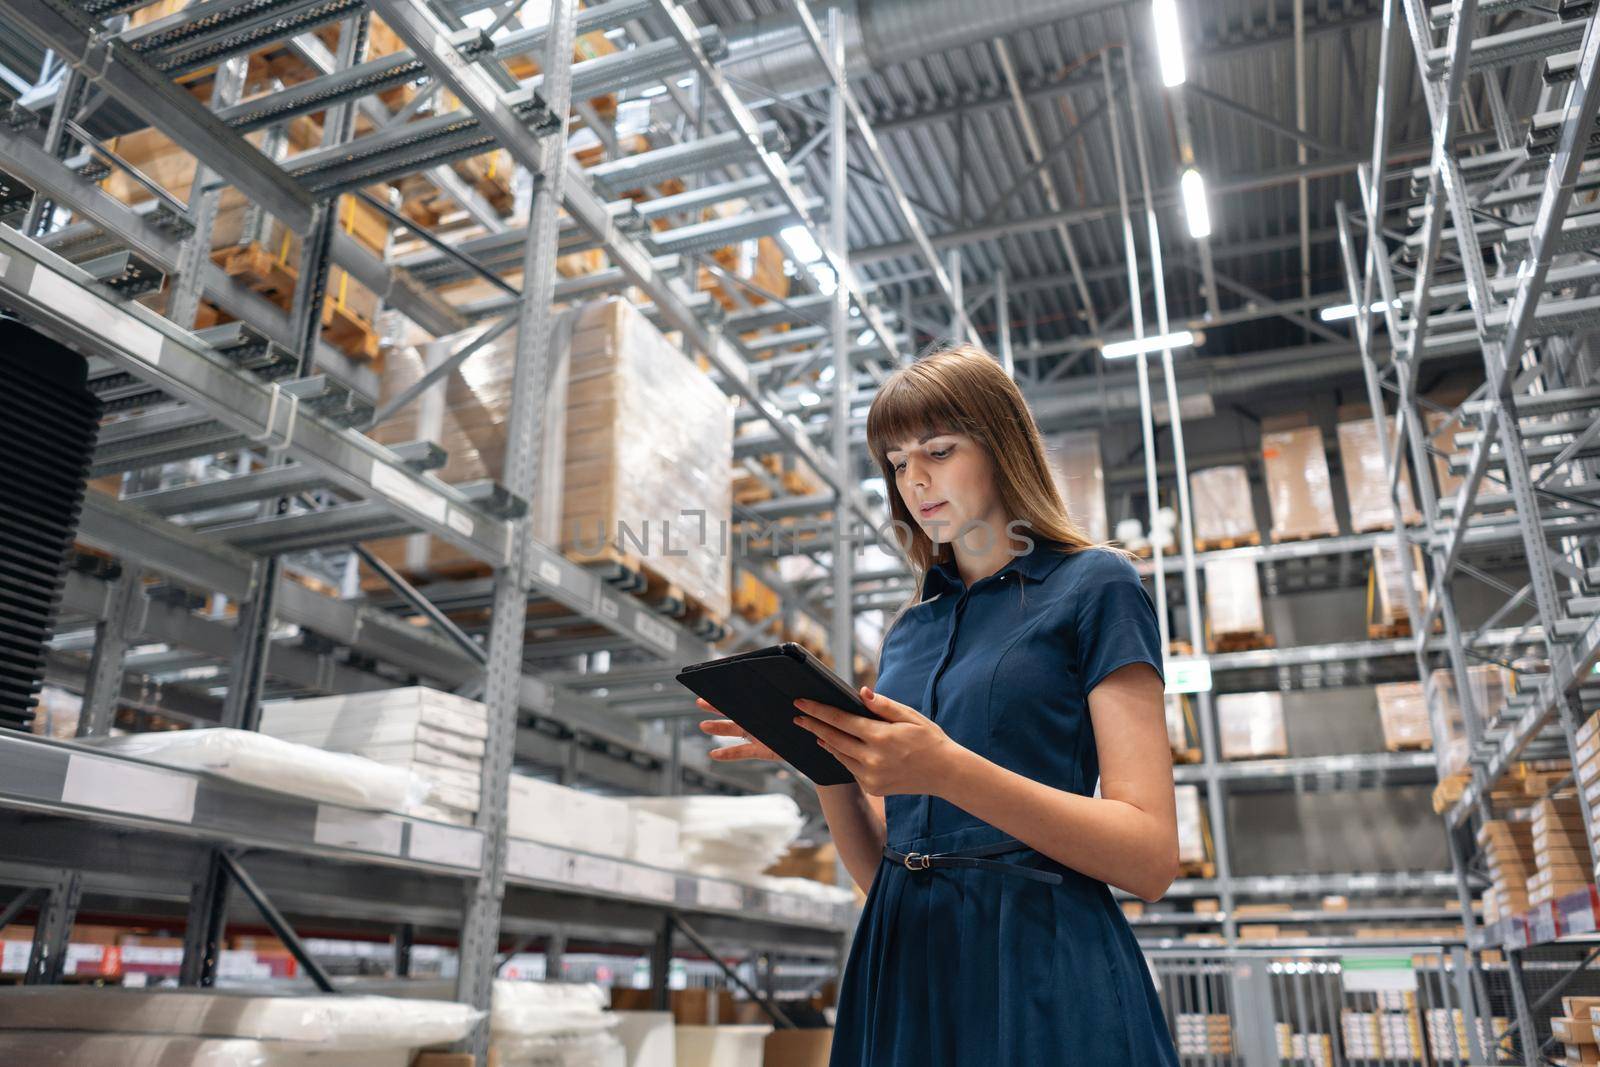 Wholesale warehouse. Beautiful young woman worker of store in shopping center. Girl looking for goods with a tablet is checking inventory levels in a warehouse. Logistics concept.